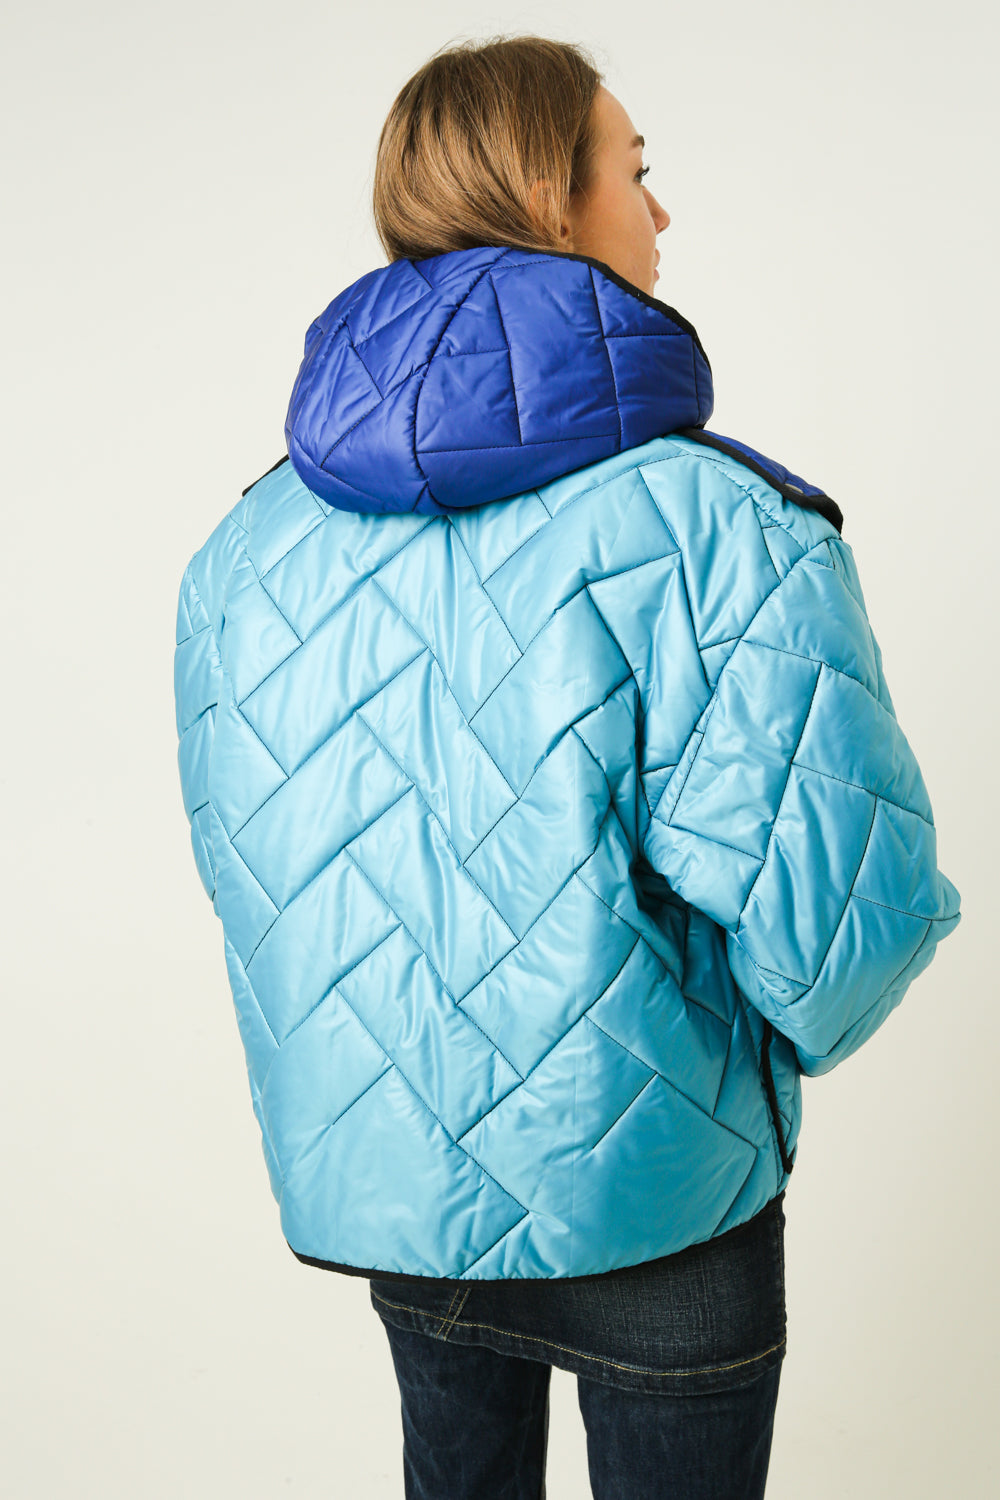 Down jacket in the style of deconstruction